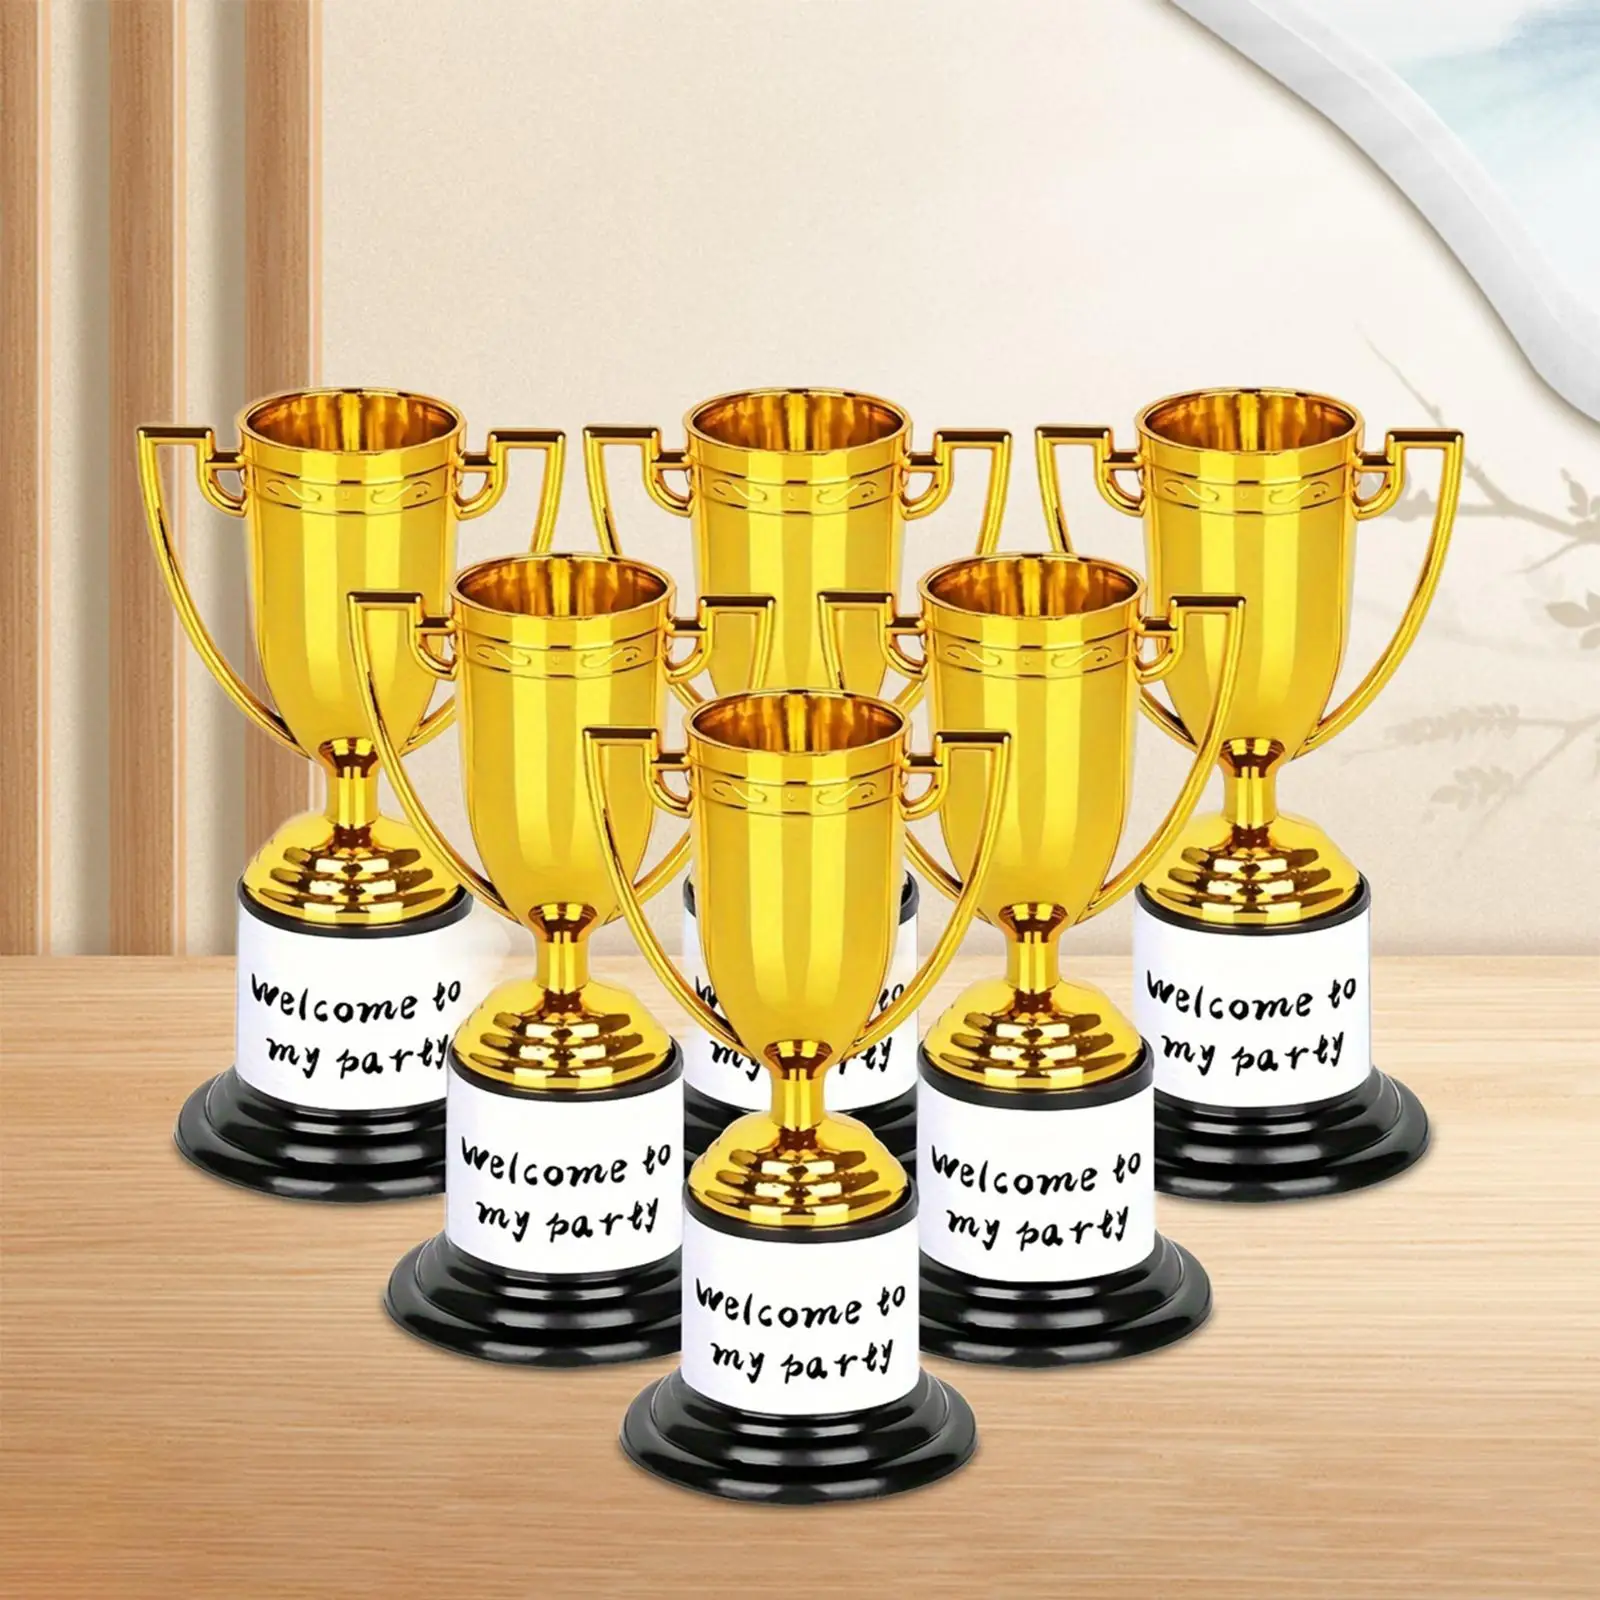 6x Children Trophies Funny Round Base Trophies for Kids for Celebrations Competitions Rewards Party Favors Sports Championships